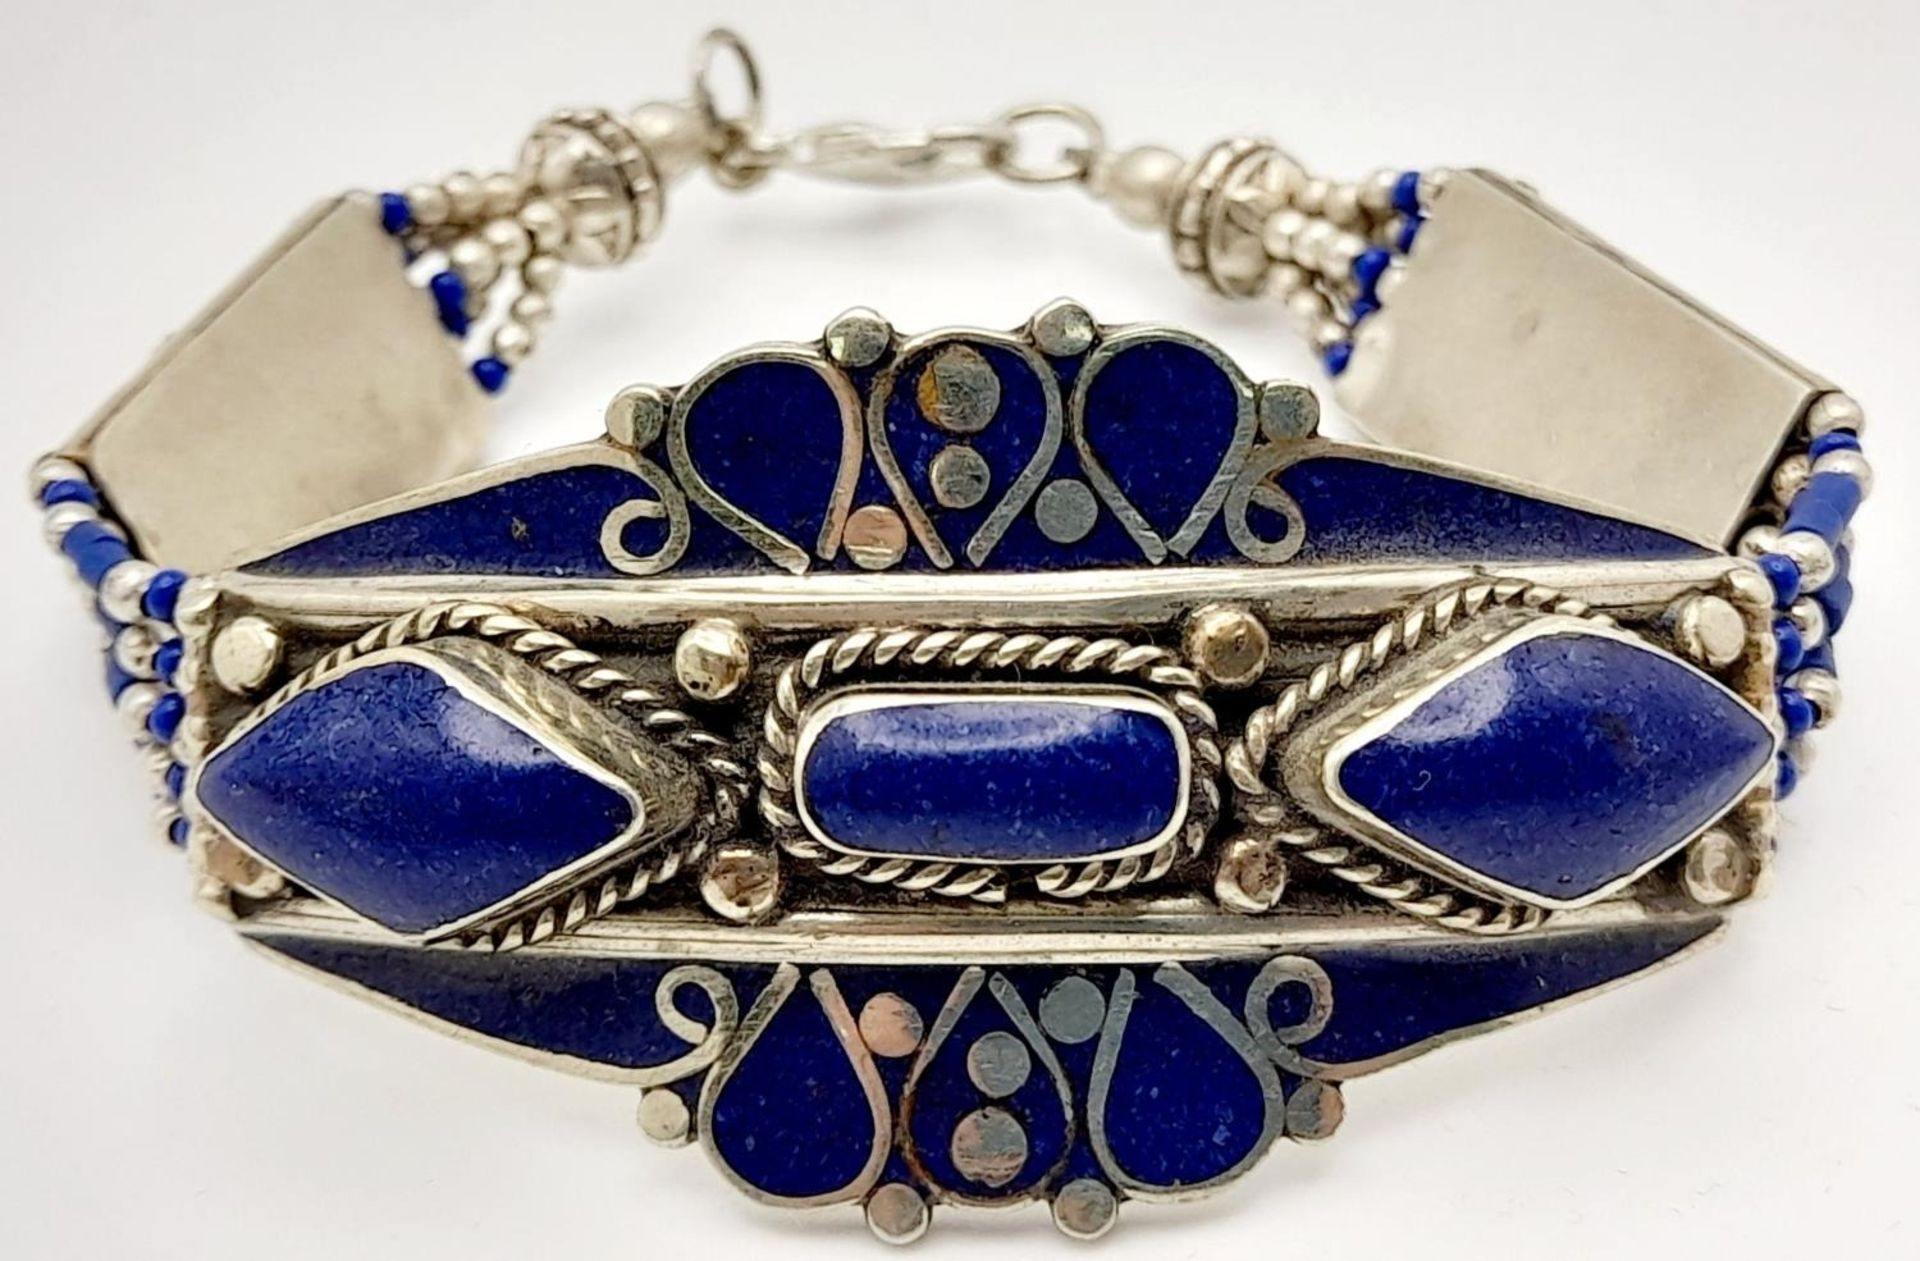 A tribal, wonderfully crafted, white metal and lapis lazuli necklace and bracelet set in a - Image 5 of 6